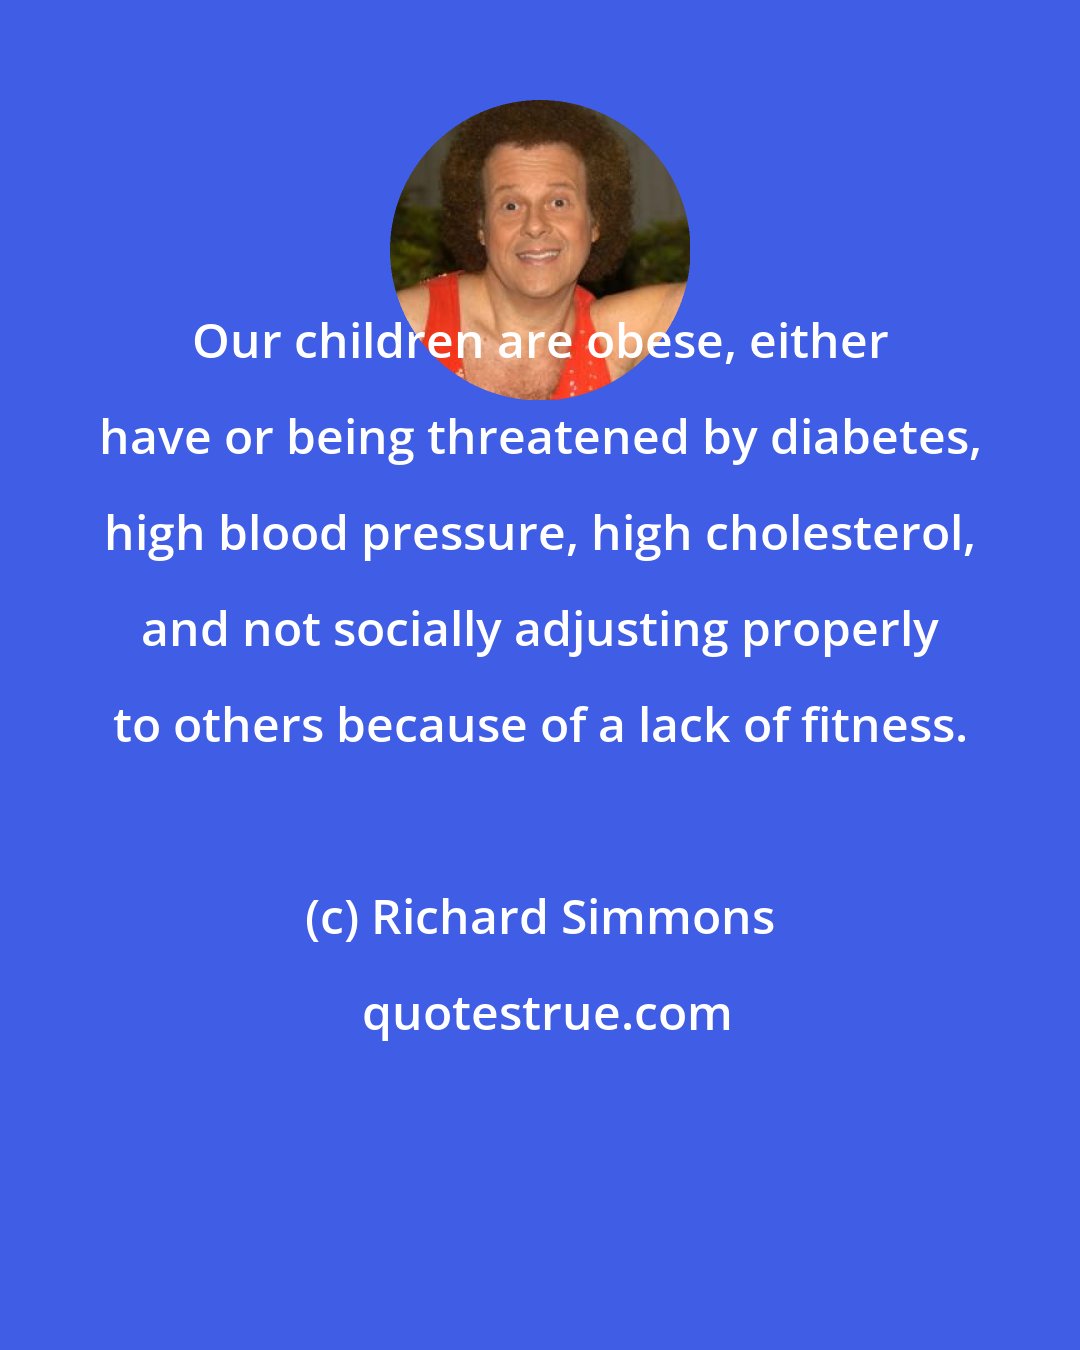 Richard Simmons: Our children are obese, either have or being threatened by diabetes, high blood pressure, high cholesterol, and not socially adjusting properly to others because of a lack of fitness.